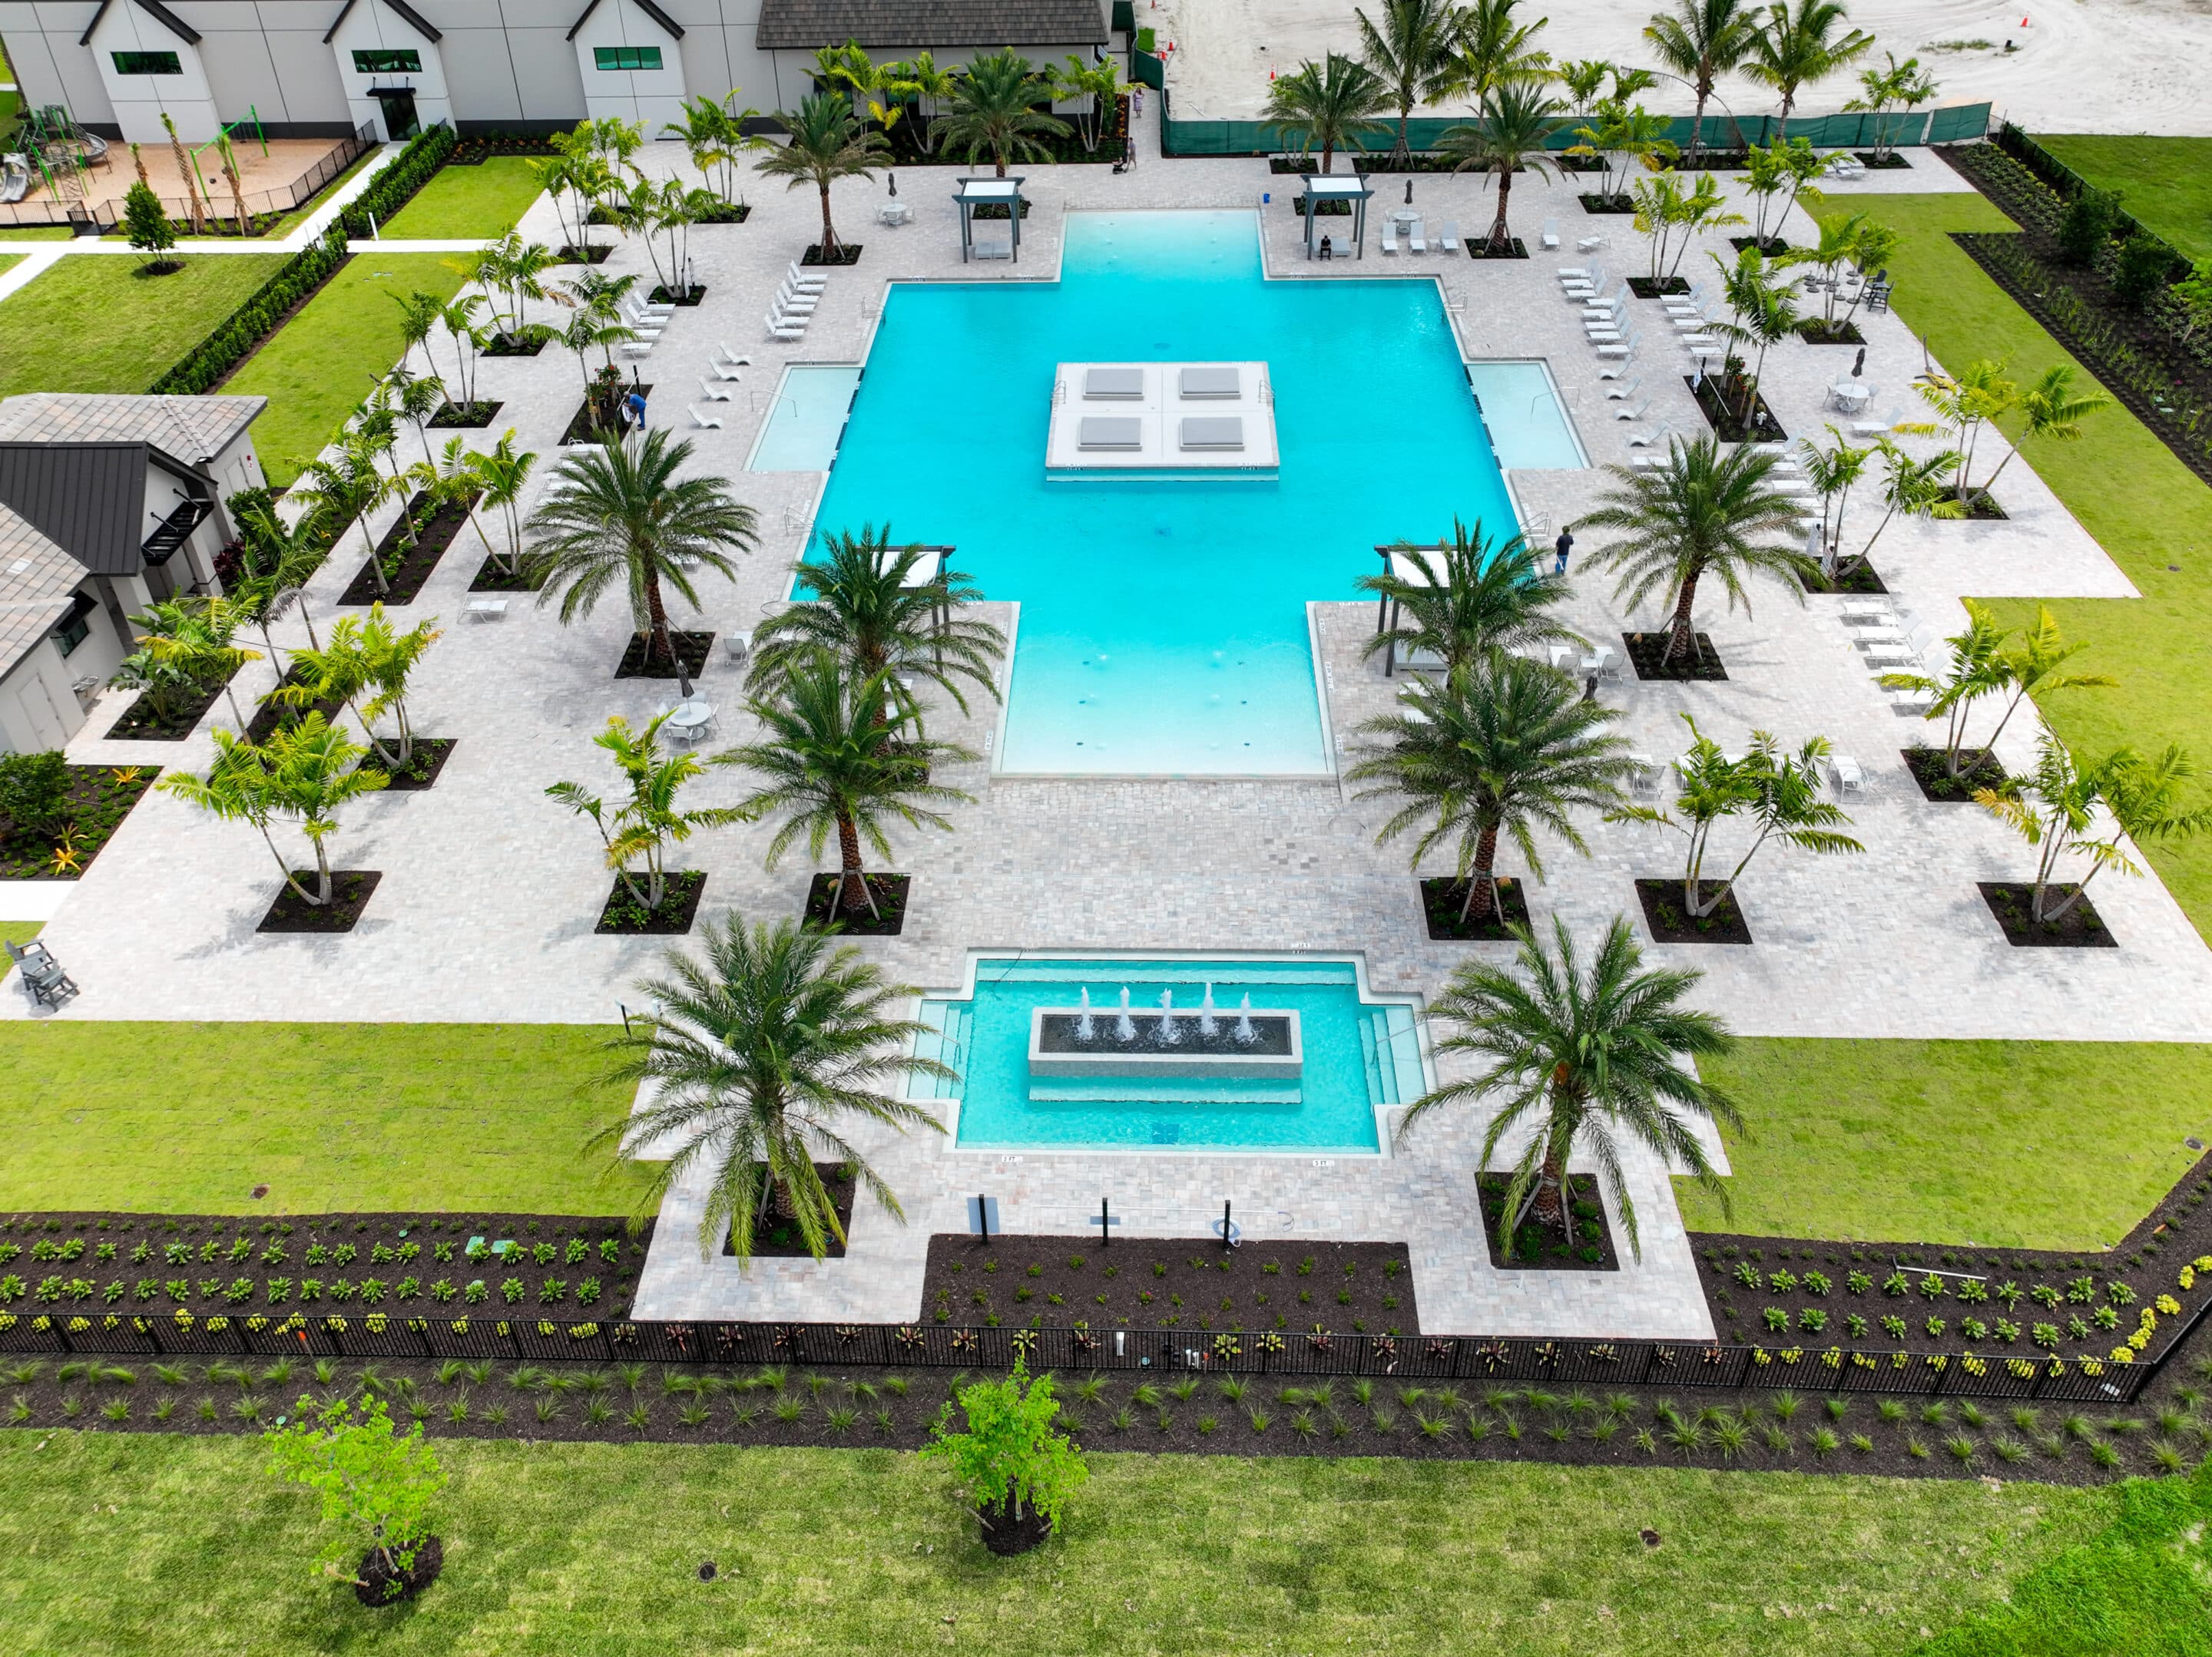 Swimming pool and pool deck